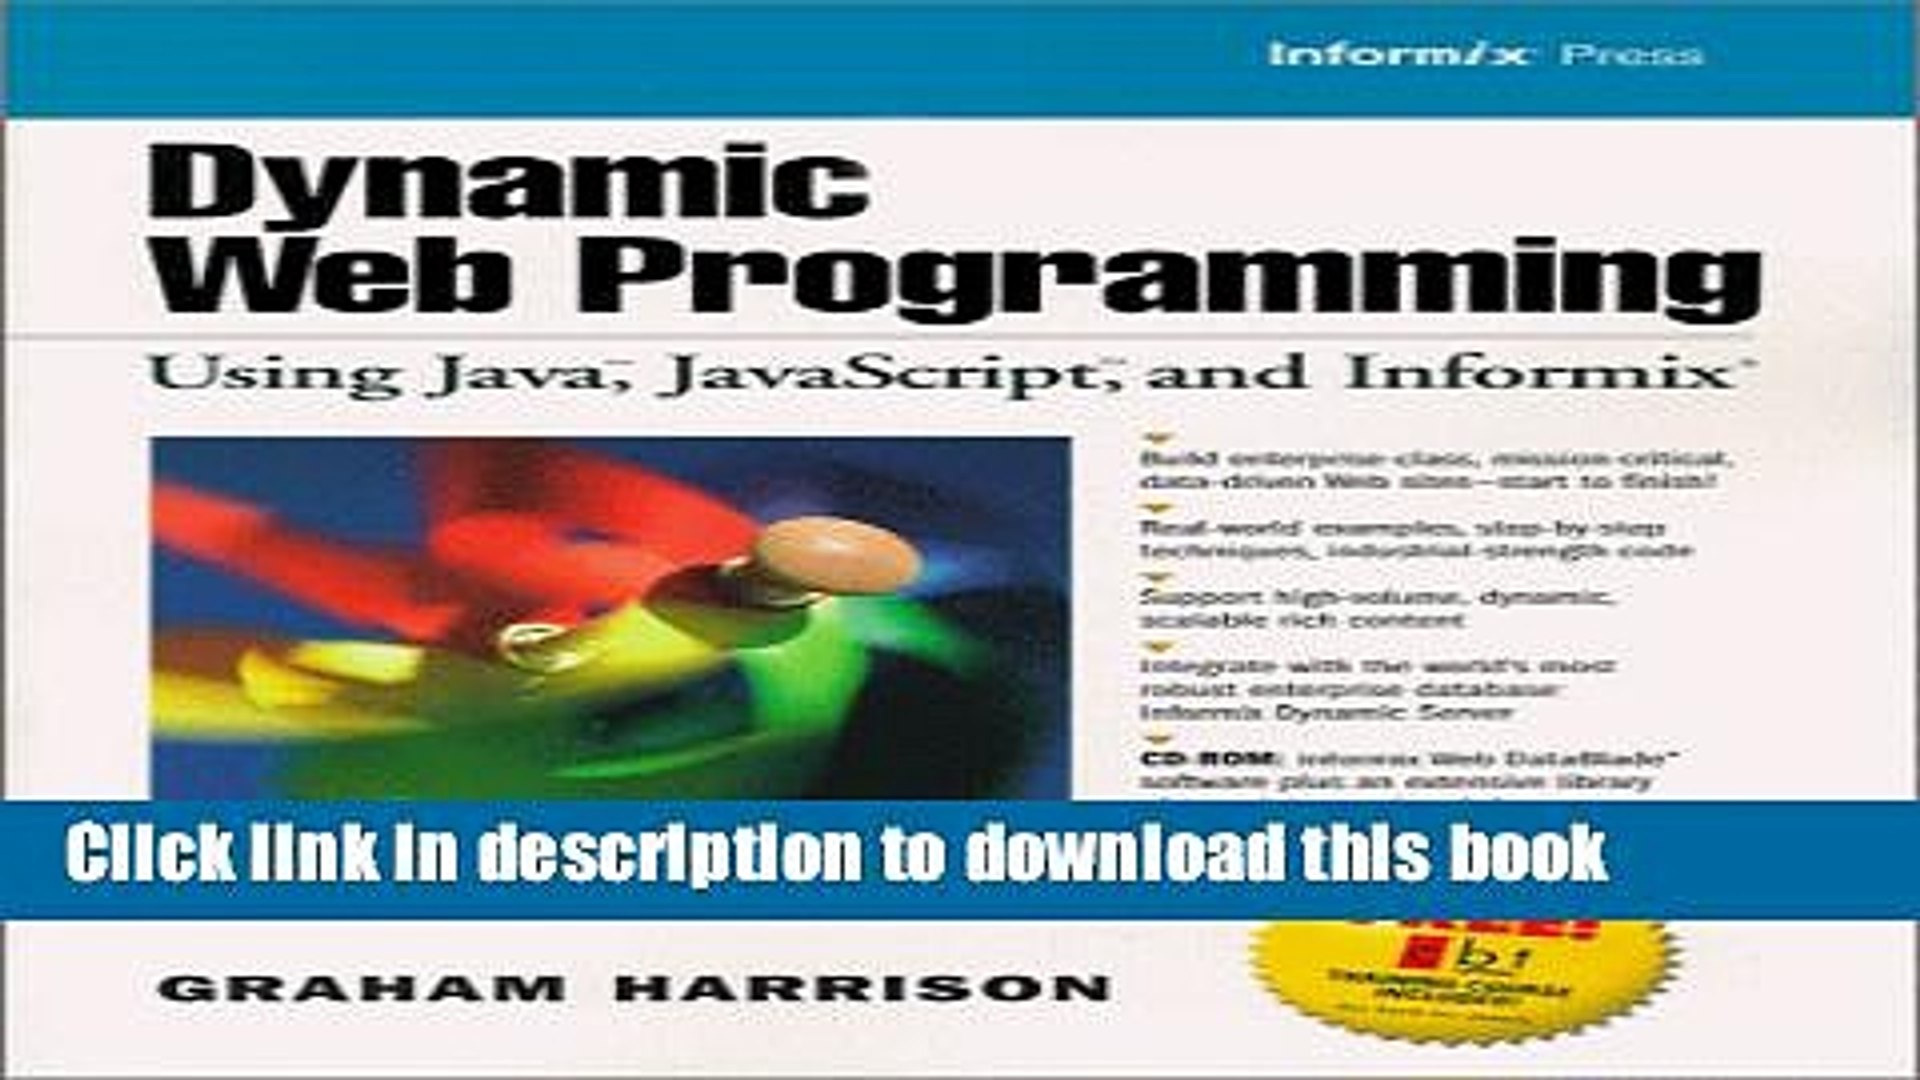 [Download] Dynamic Web Programming Using Java, JavaScript, and Informix with CDROM Full Free